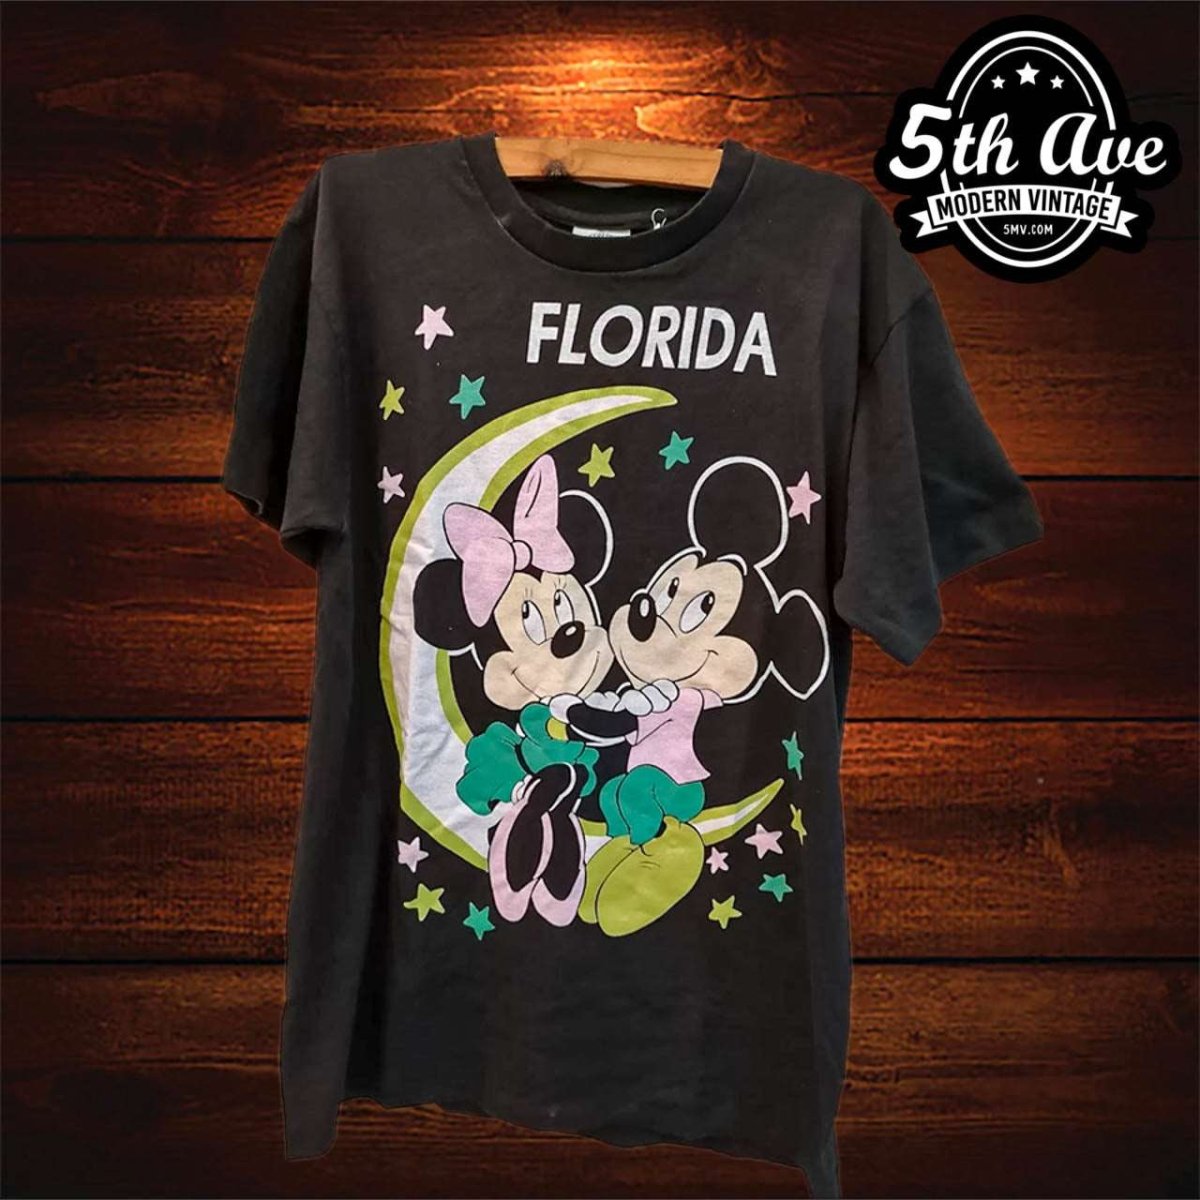 Lunar Love: Mickey and Minnie's Moonlight Adventure t shirt - Vintage Band Shirts